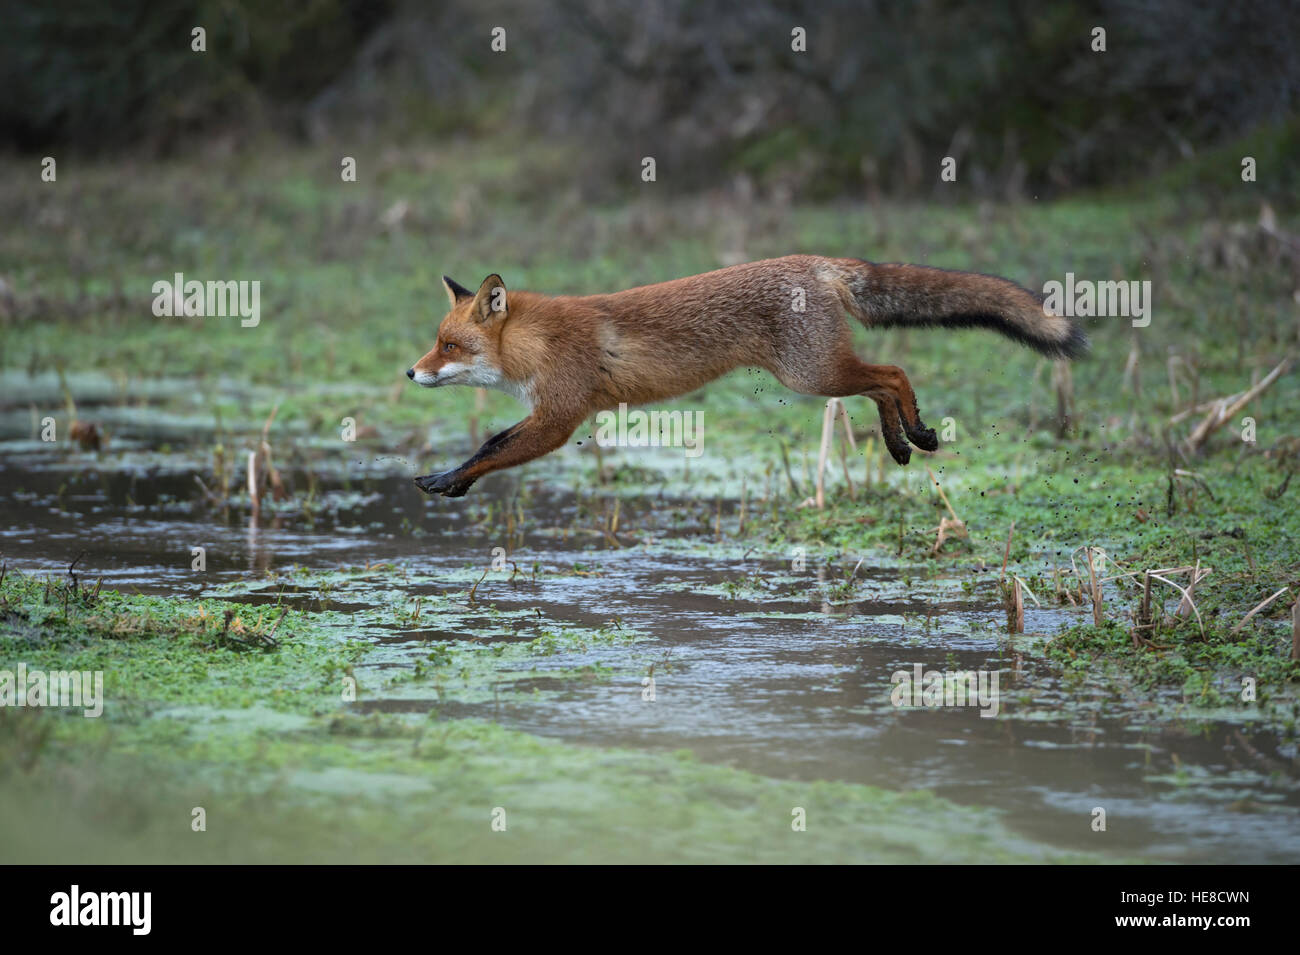 Red Fox / Rotfuchs ( Vulpes vulpes ), adult in winter fur, jumping over a little creek in a swamp, far jump, looks funny. Stock Photo